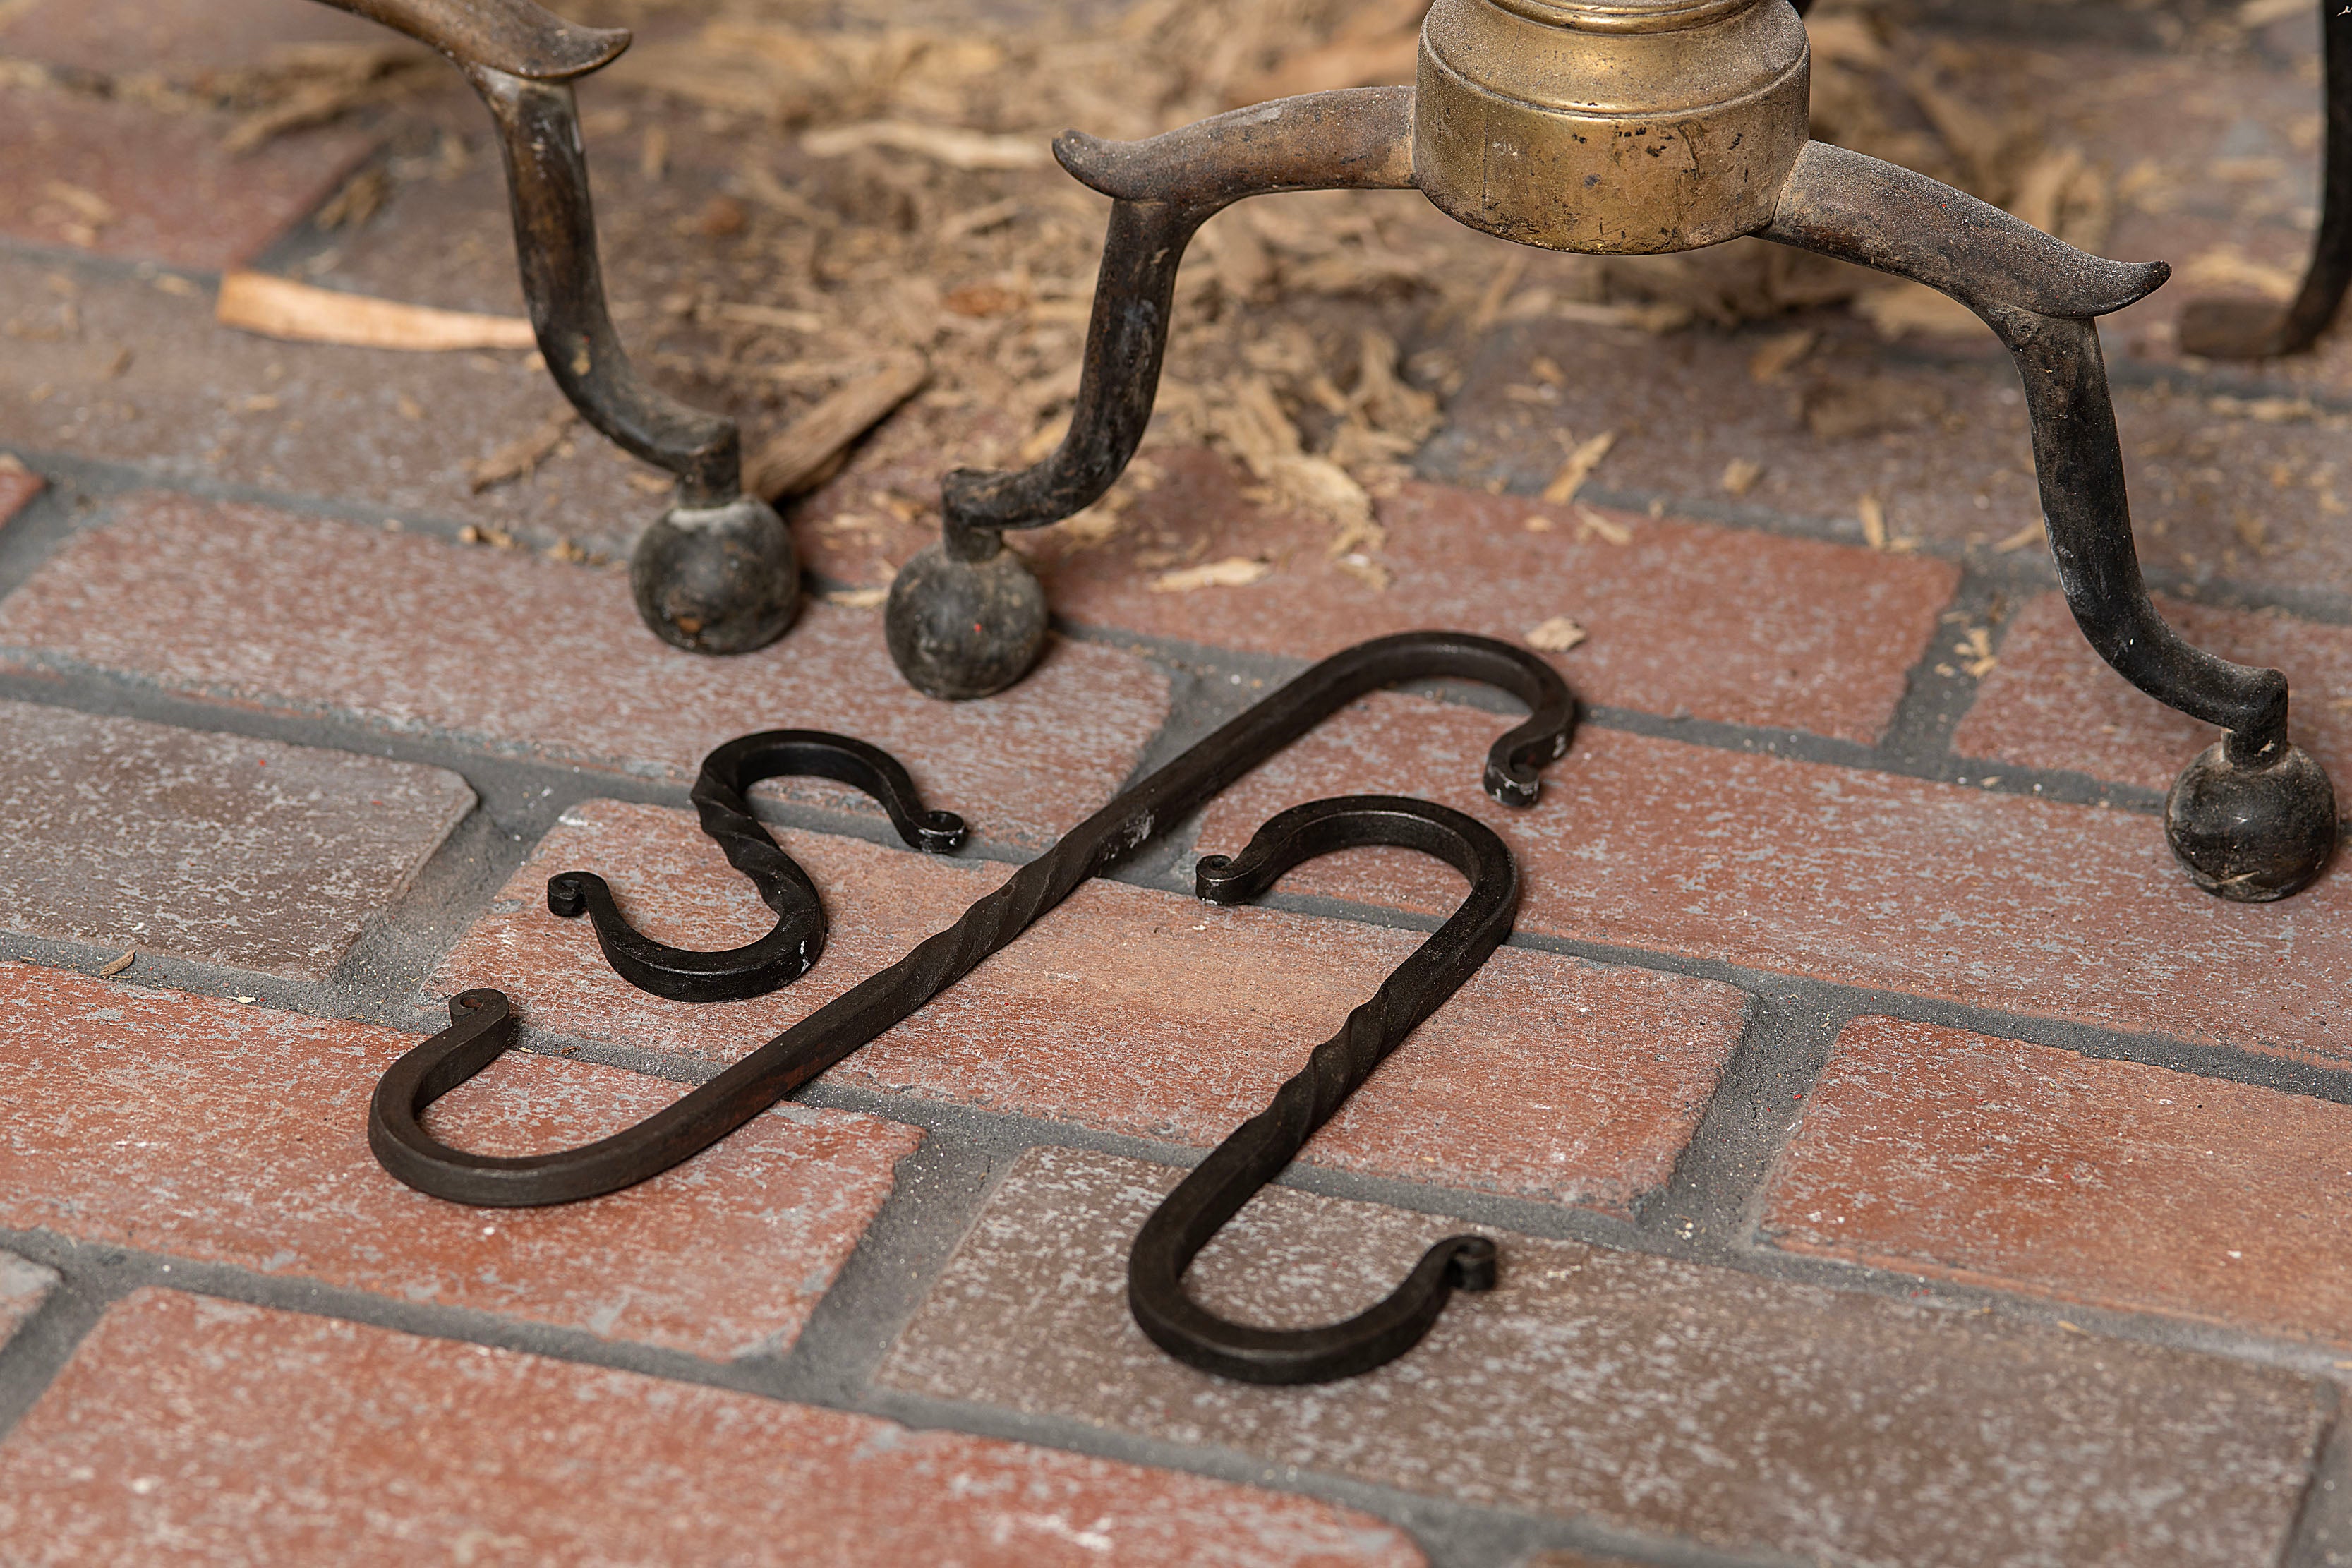 Large Hand Forged S Hook, Kitchen Hooks, Forged in the UK 